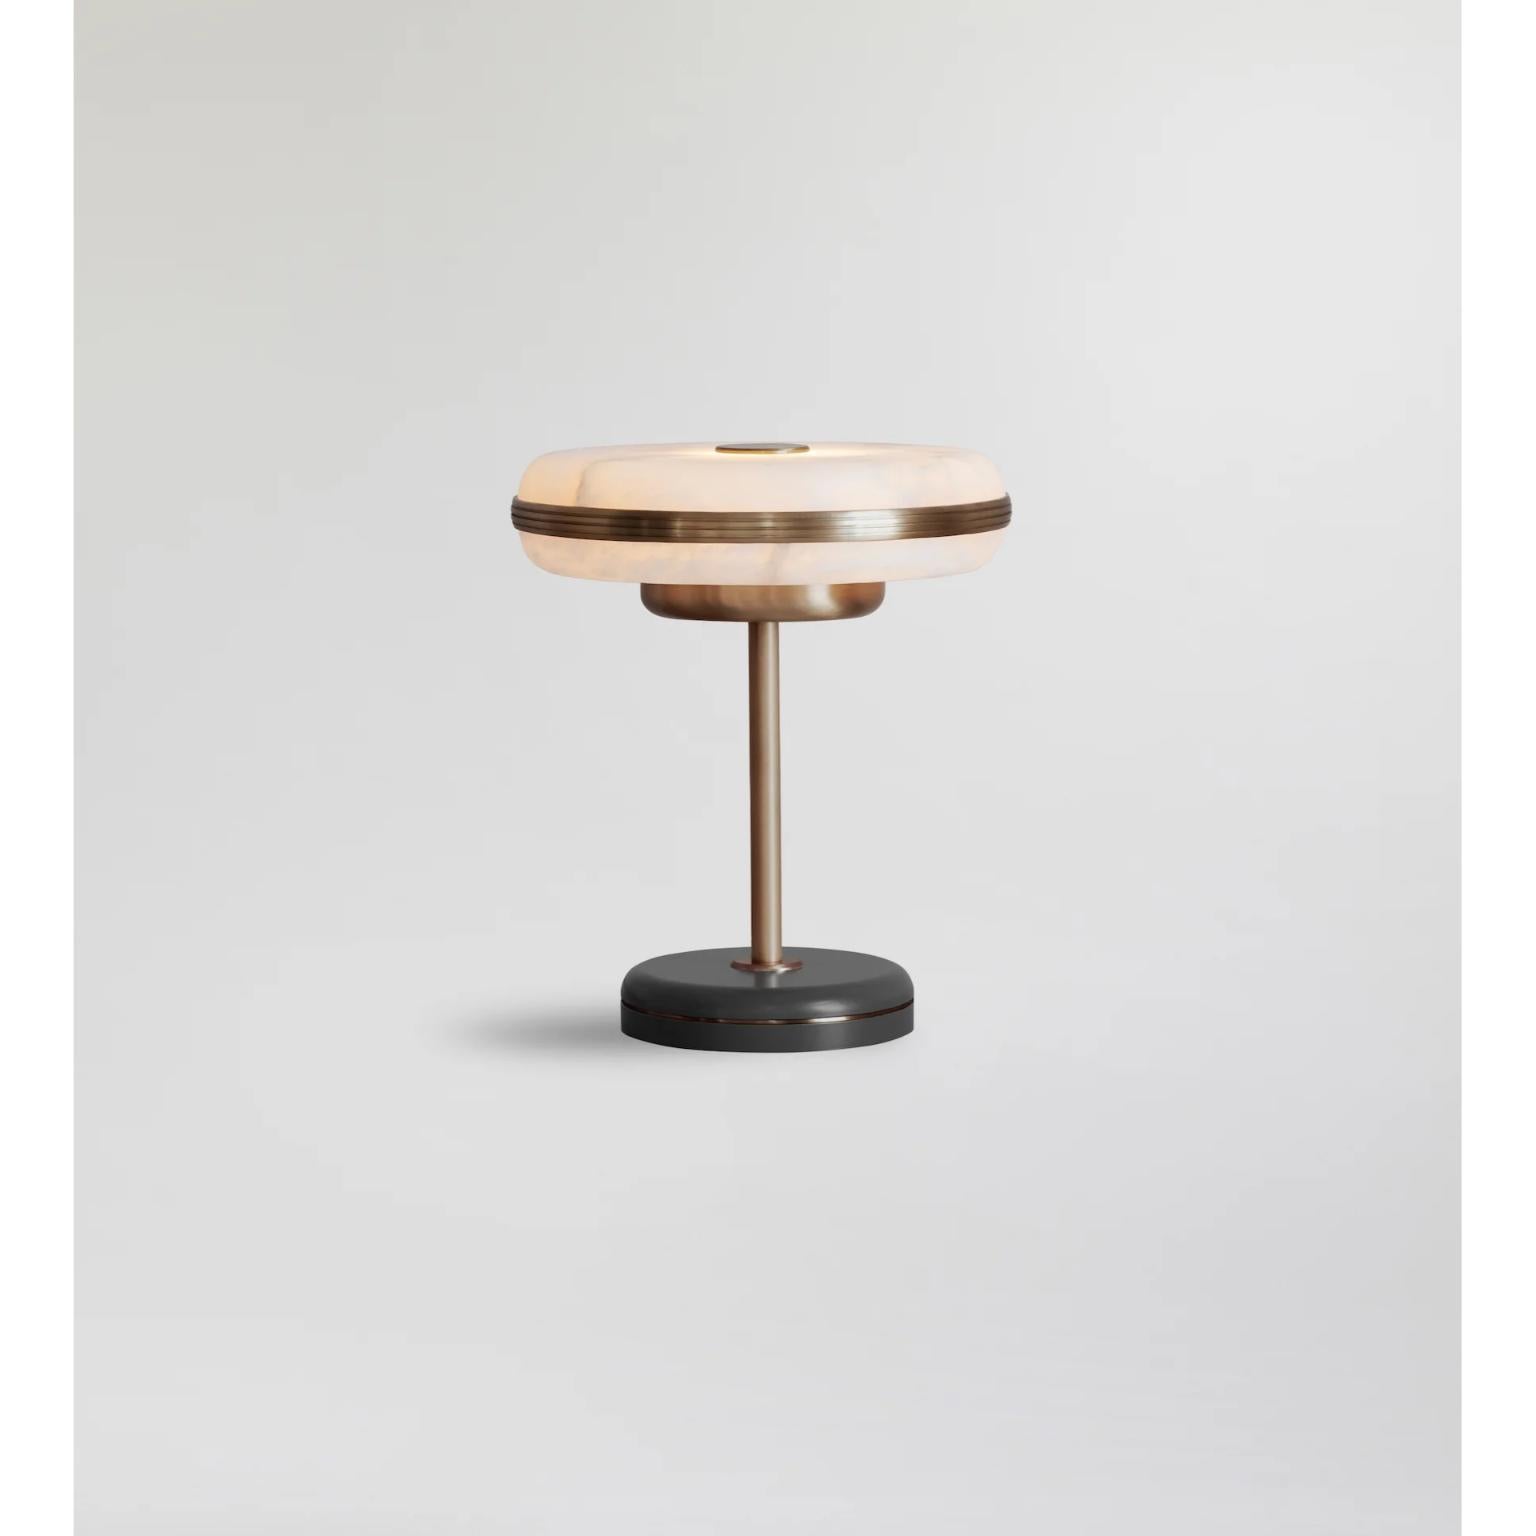 Beran Antique Brass Small Table Lamp by Bert Frank
Dimensions: Ø 26 x H 28 cm.
Materials: Brass and alabaster.
Base finish: Satin black.

Available in two different sizes. Available in different finishes and materials. Please contact us. 

The